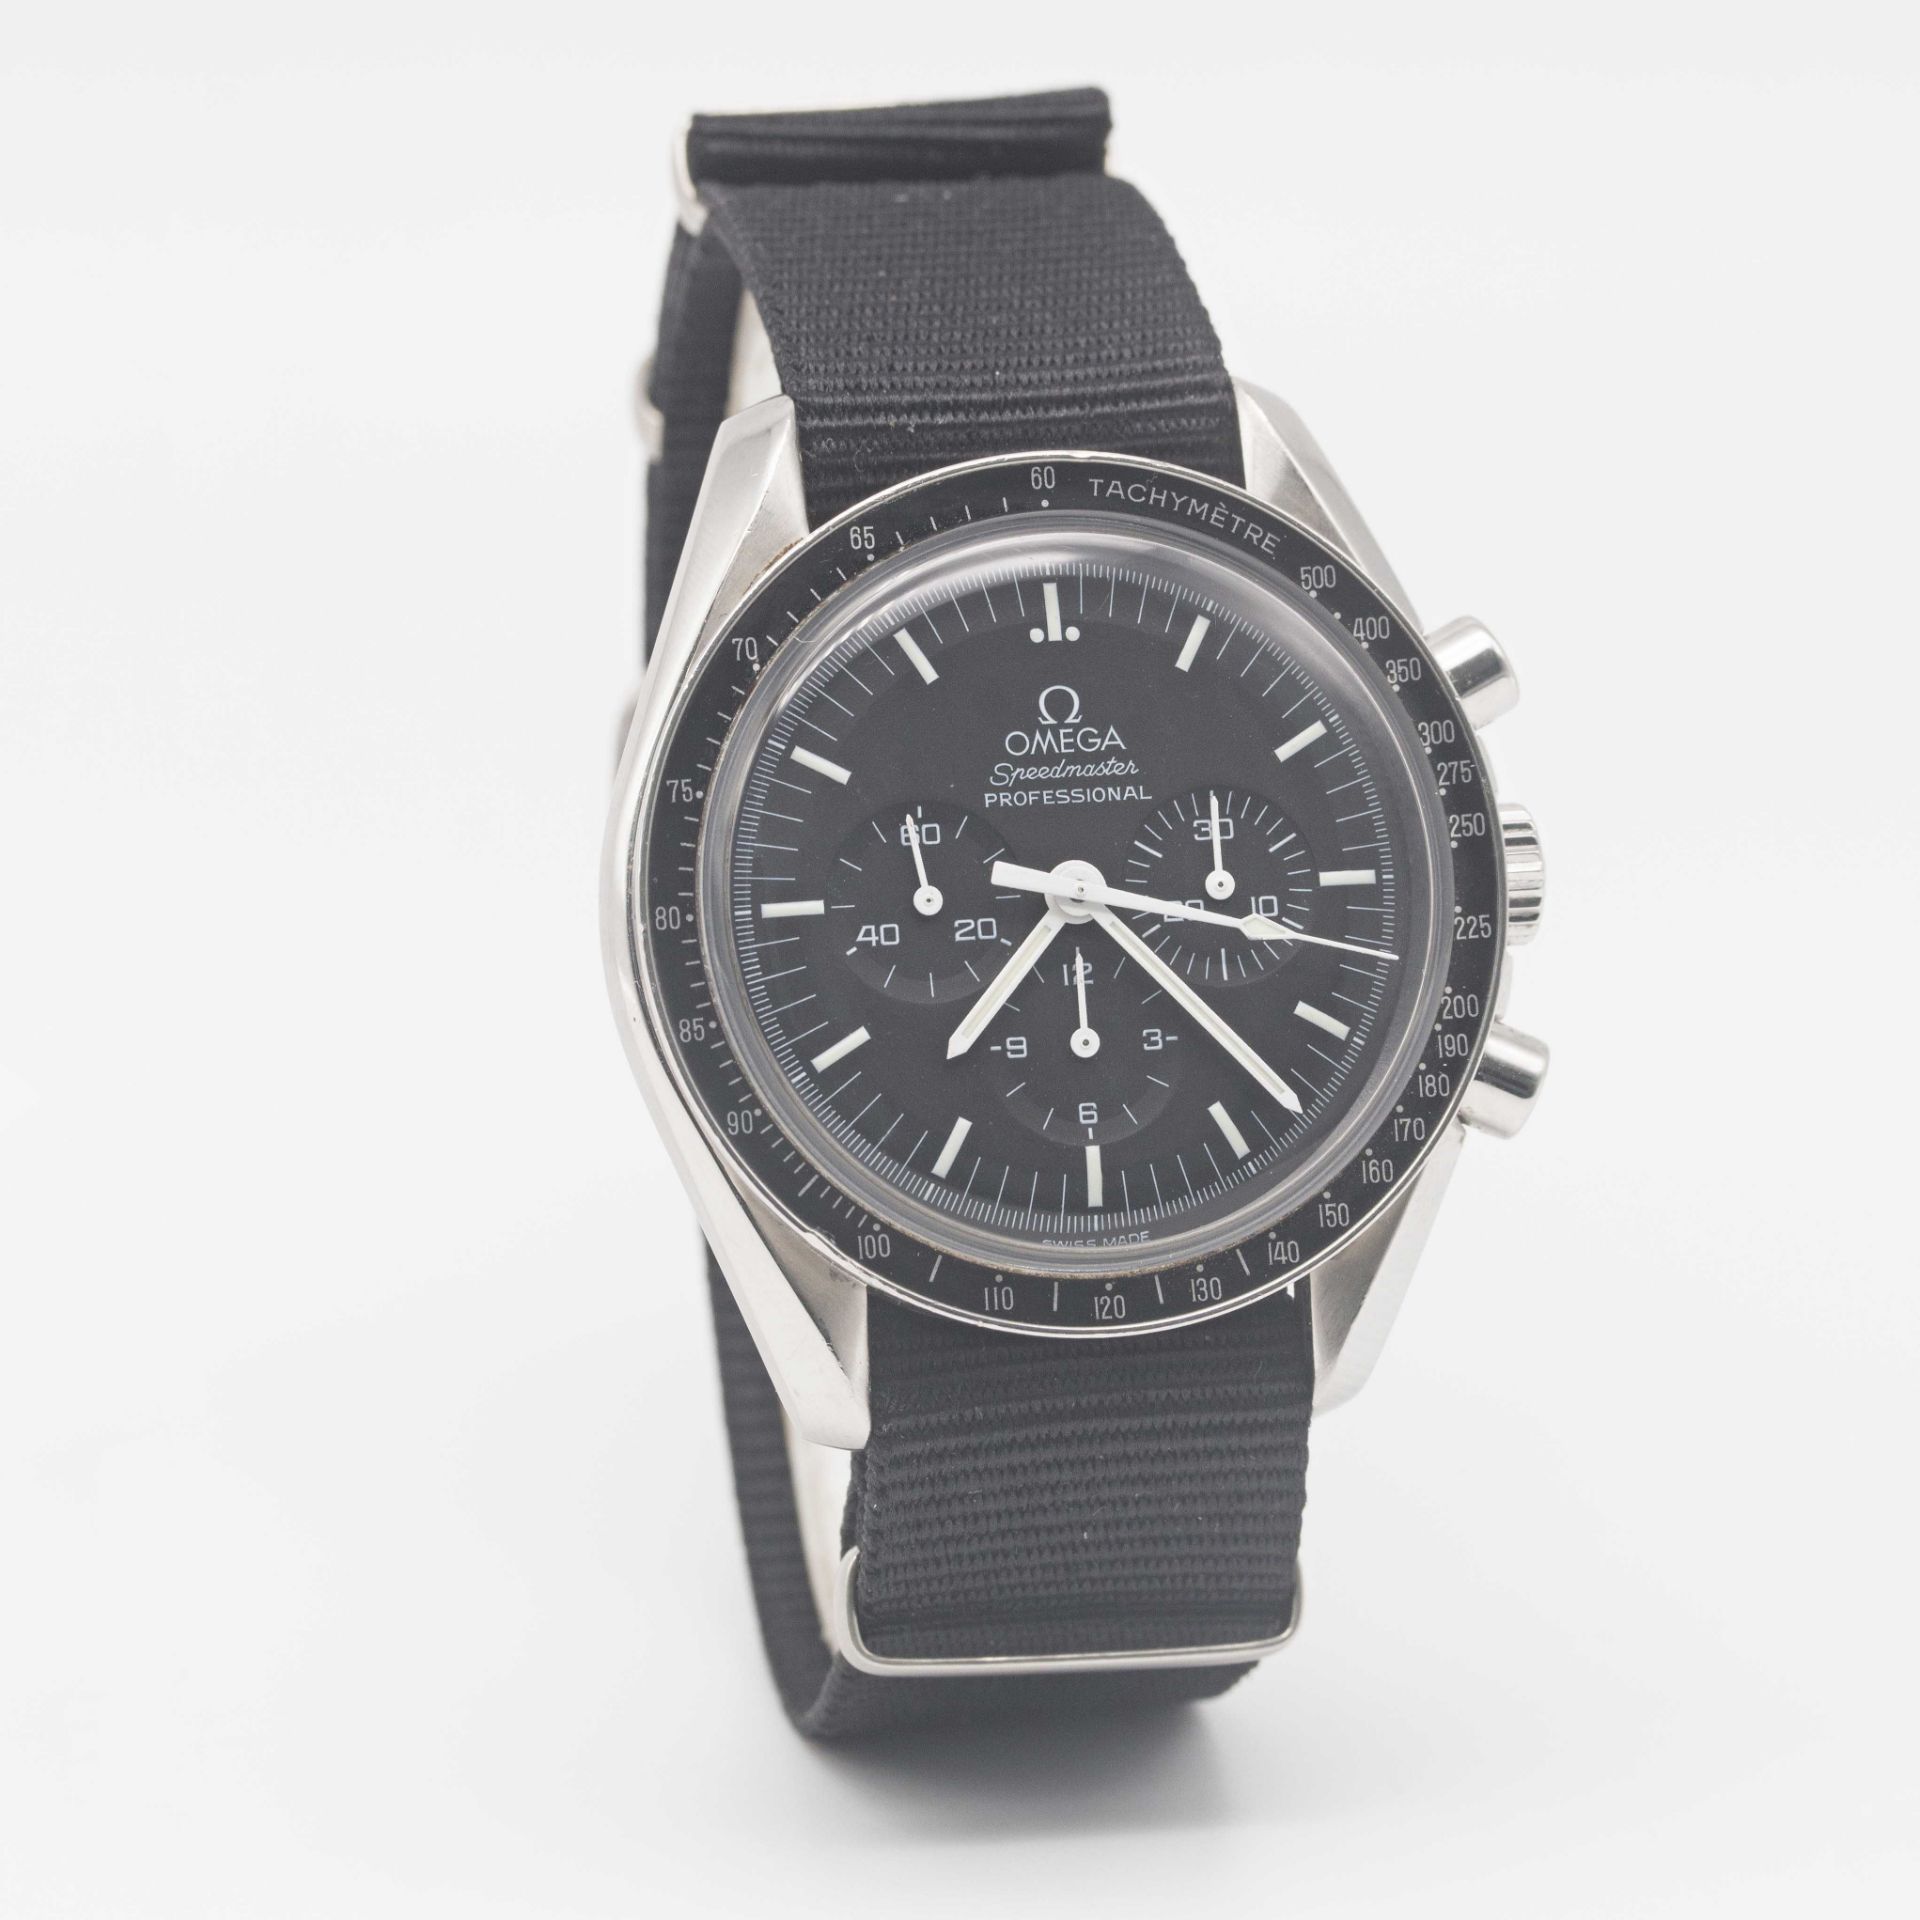 A GENTLEMAN'S STAINLESS STEEL OMEGA SPEEDMASTER PROFESSIONAL CHRONOGRAPH WRIST WATCH CIRCA 2000, - Image 5 of 9